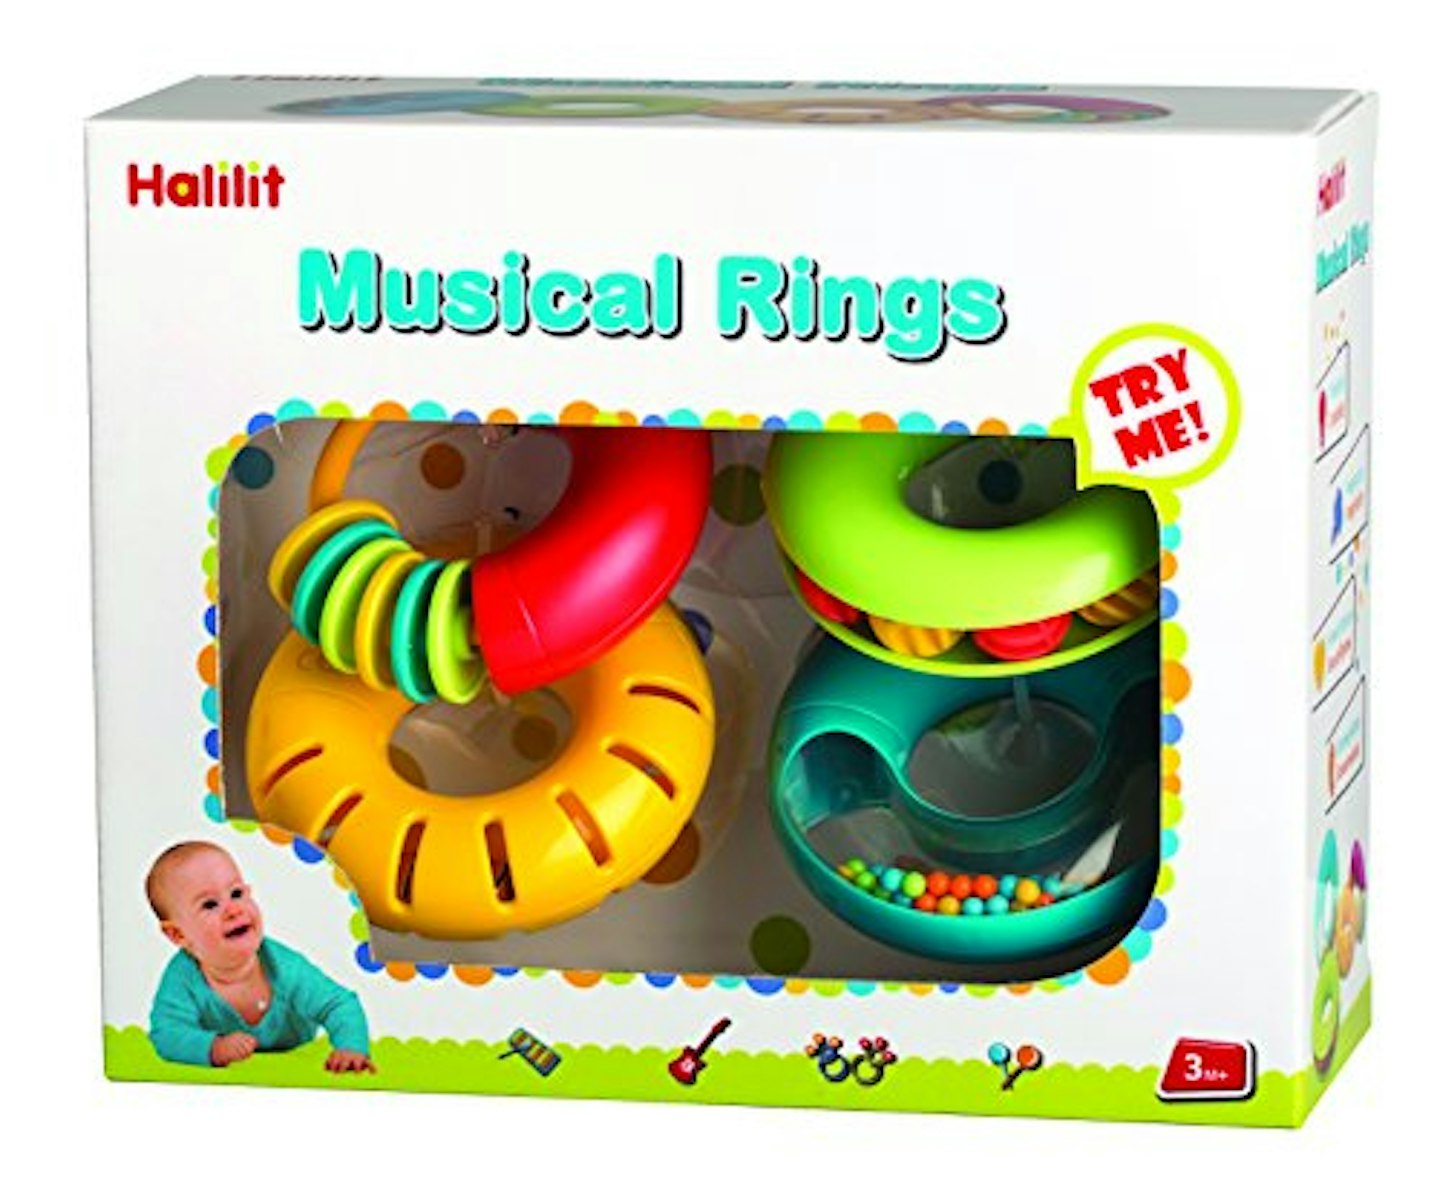 The best baby toy for music under u00a320: Halilit Musical Rings